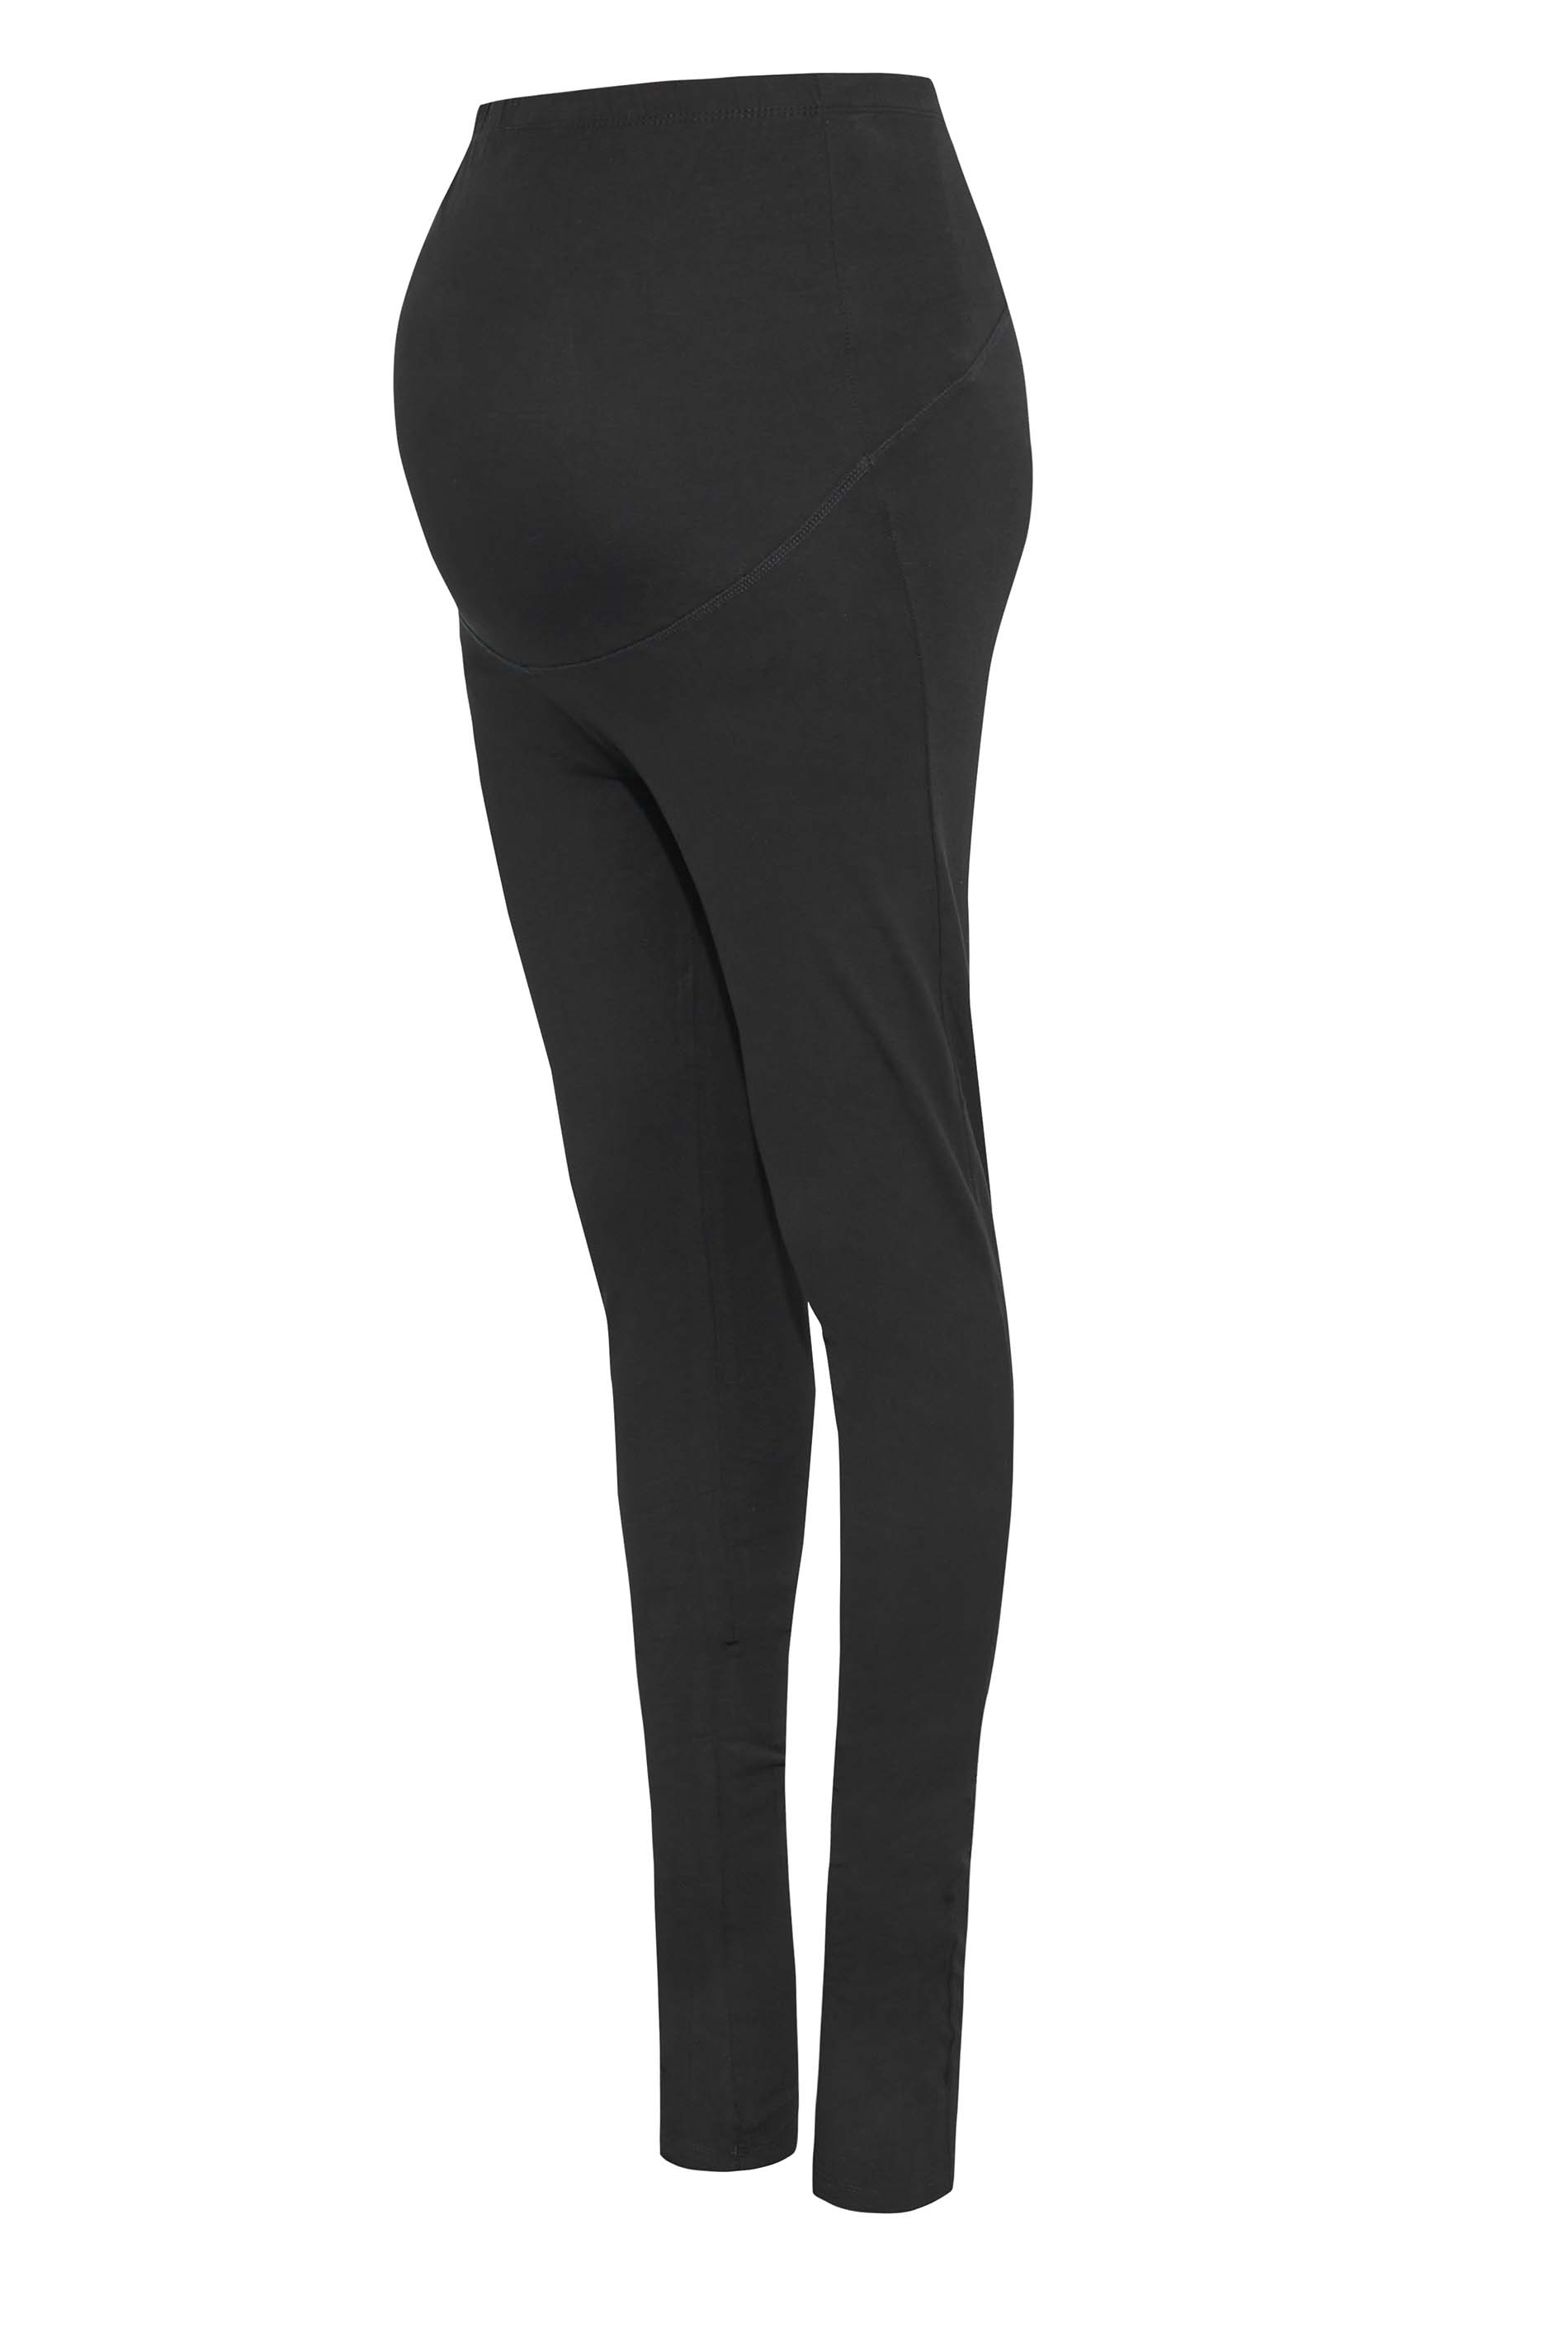 Time & Tru Maternity Black Pull On Leggings size Large - $13 - From Hayley